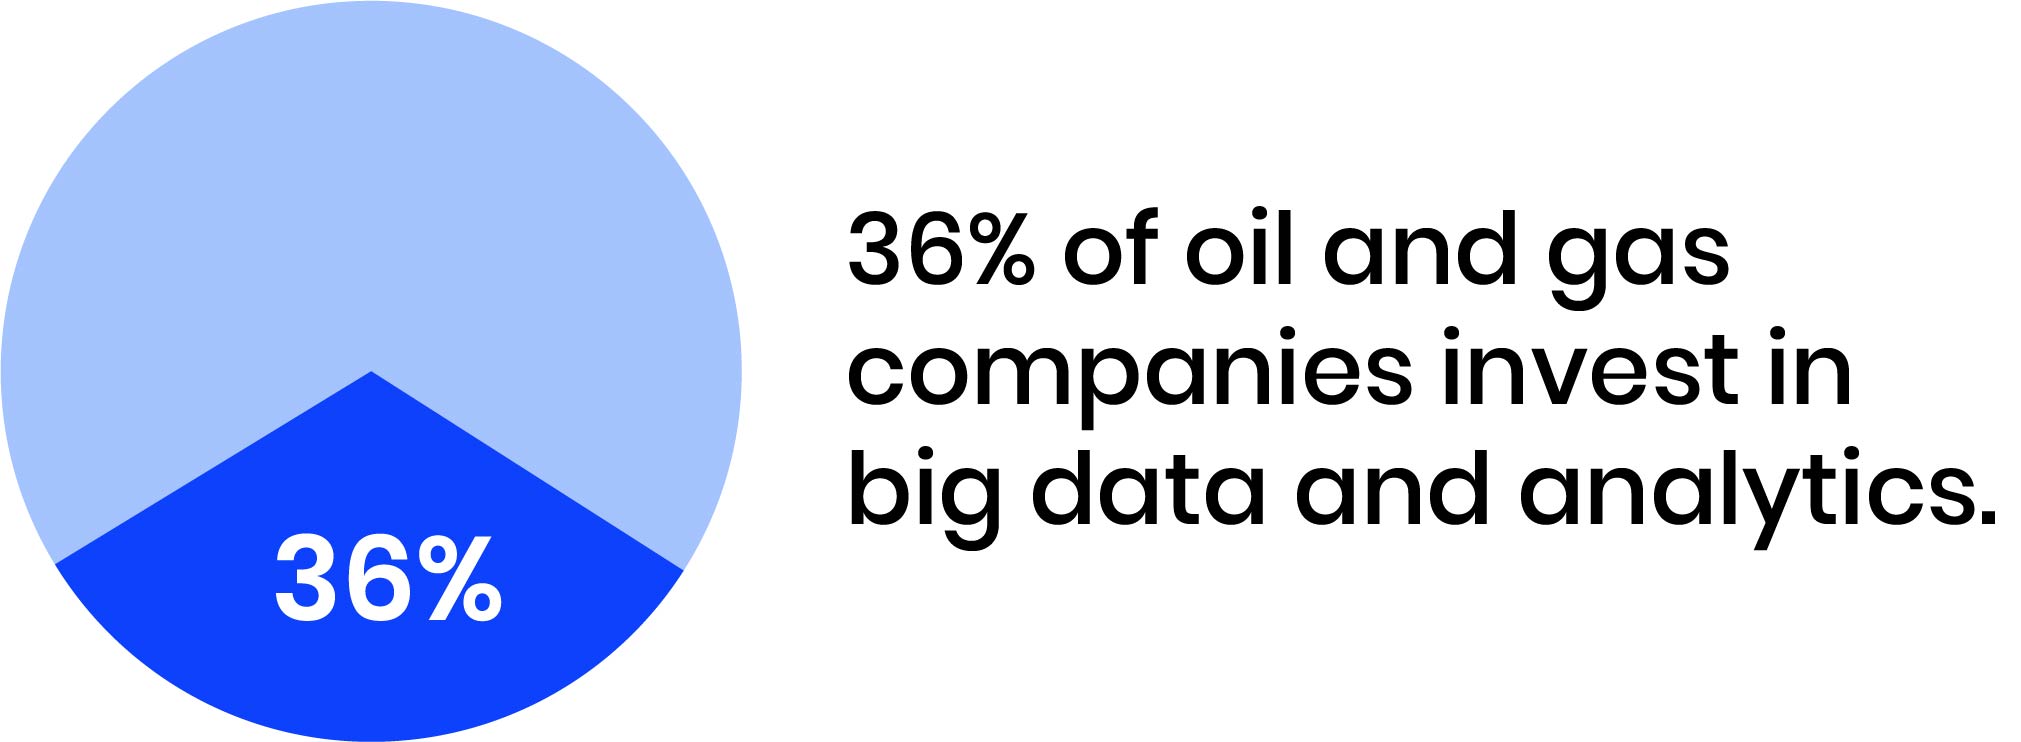 How do oil and gas companies build loyalty for customers by leveraging analytics?